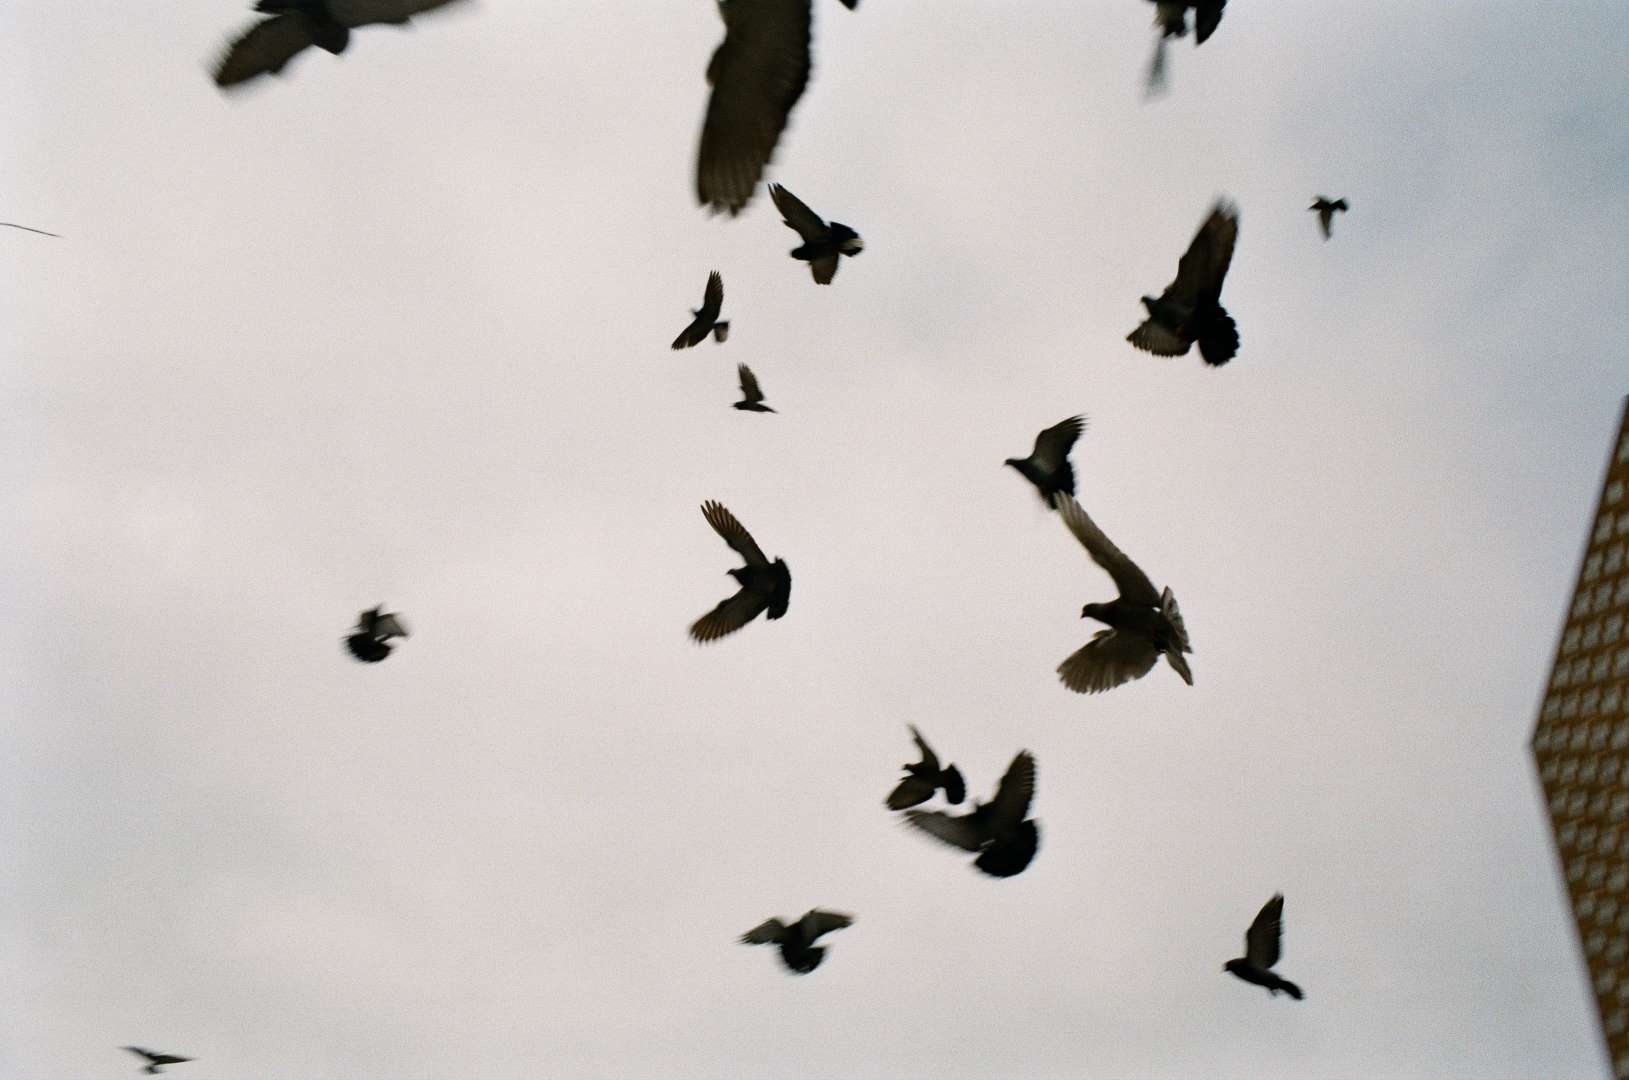 A colour photograph of a flock of birds whirling around the sky.